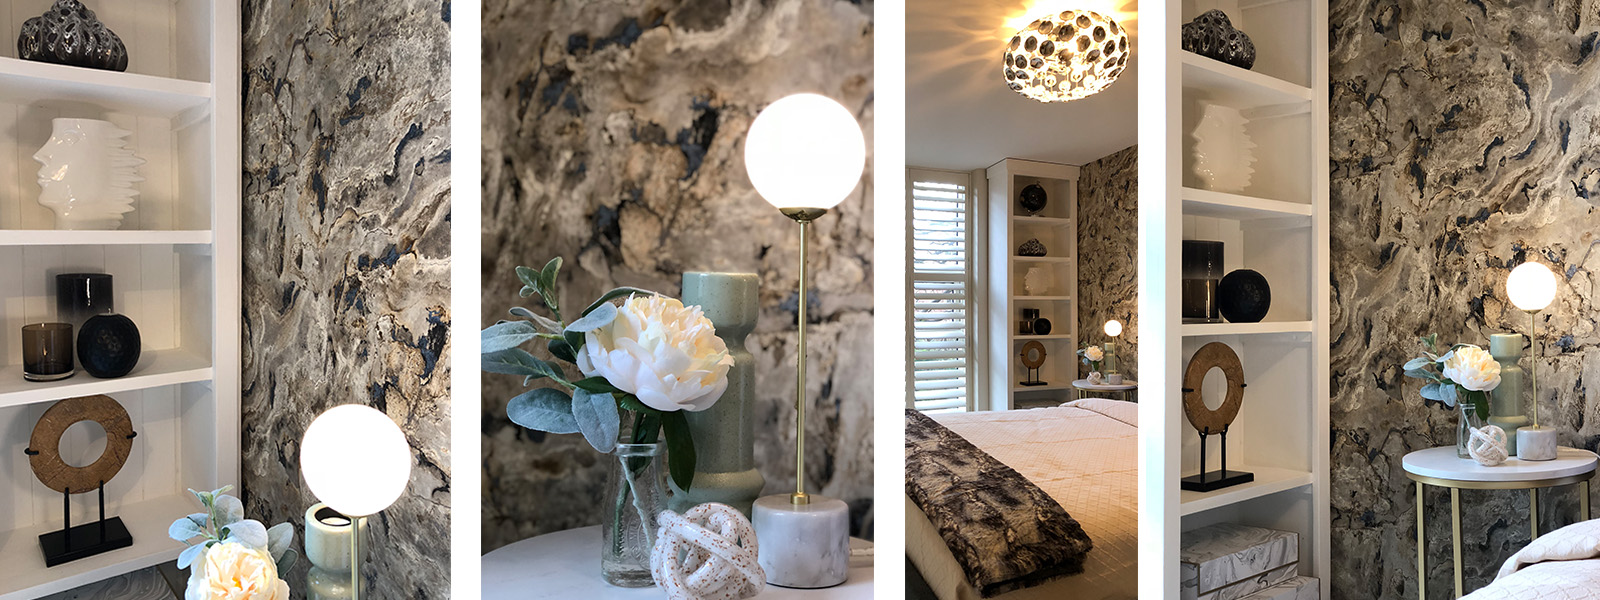 Bedroom interior design and styling details by Moji Salehi at Moji Interiors in Hove.